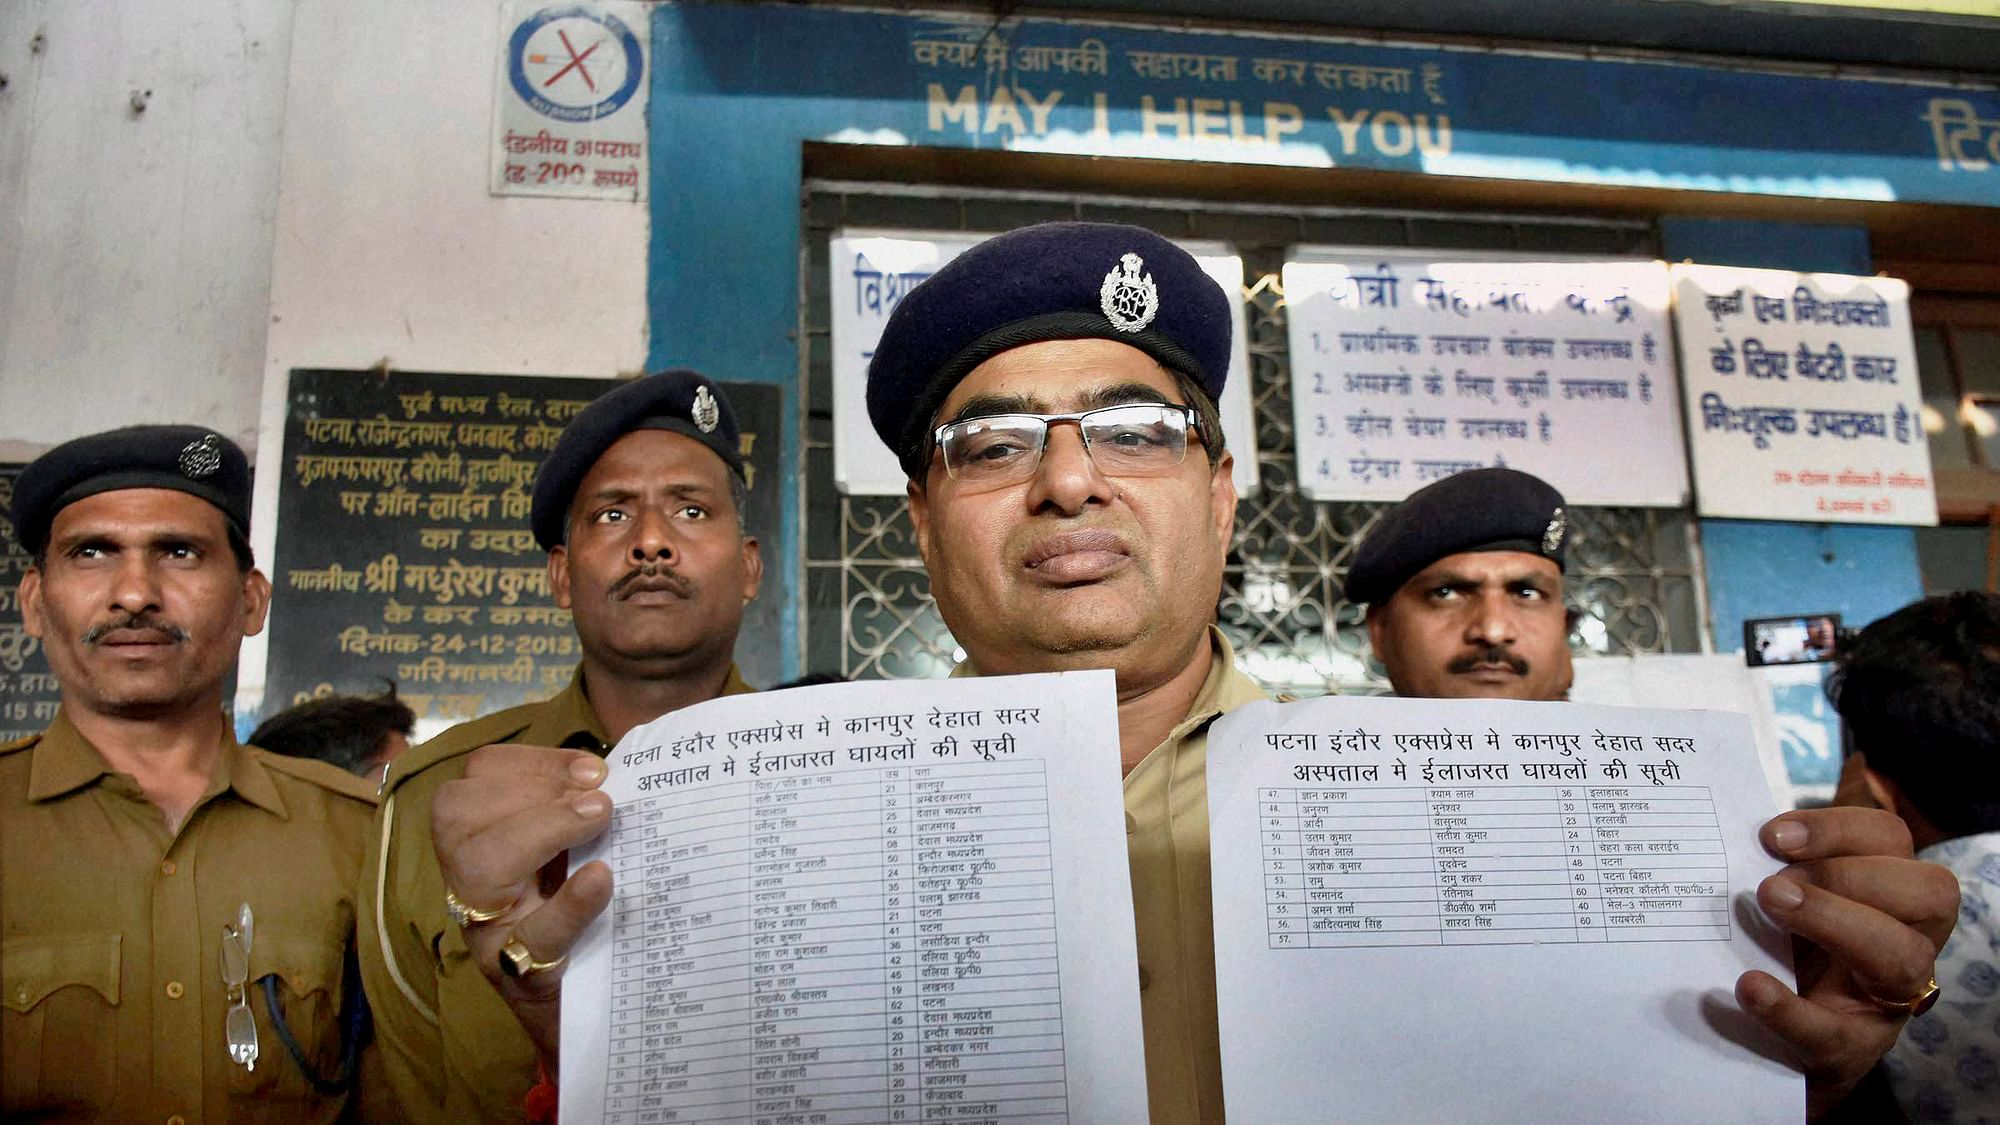 

A Government Railway Police officer shows casualty list of the Indore-Patna Express which derailed near Kanpur. (Photo: PTI)